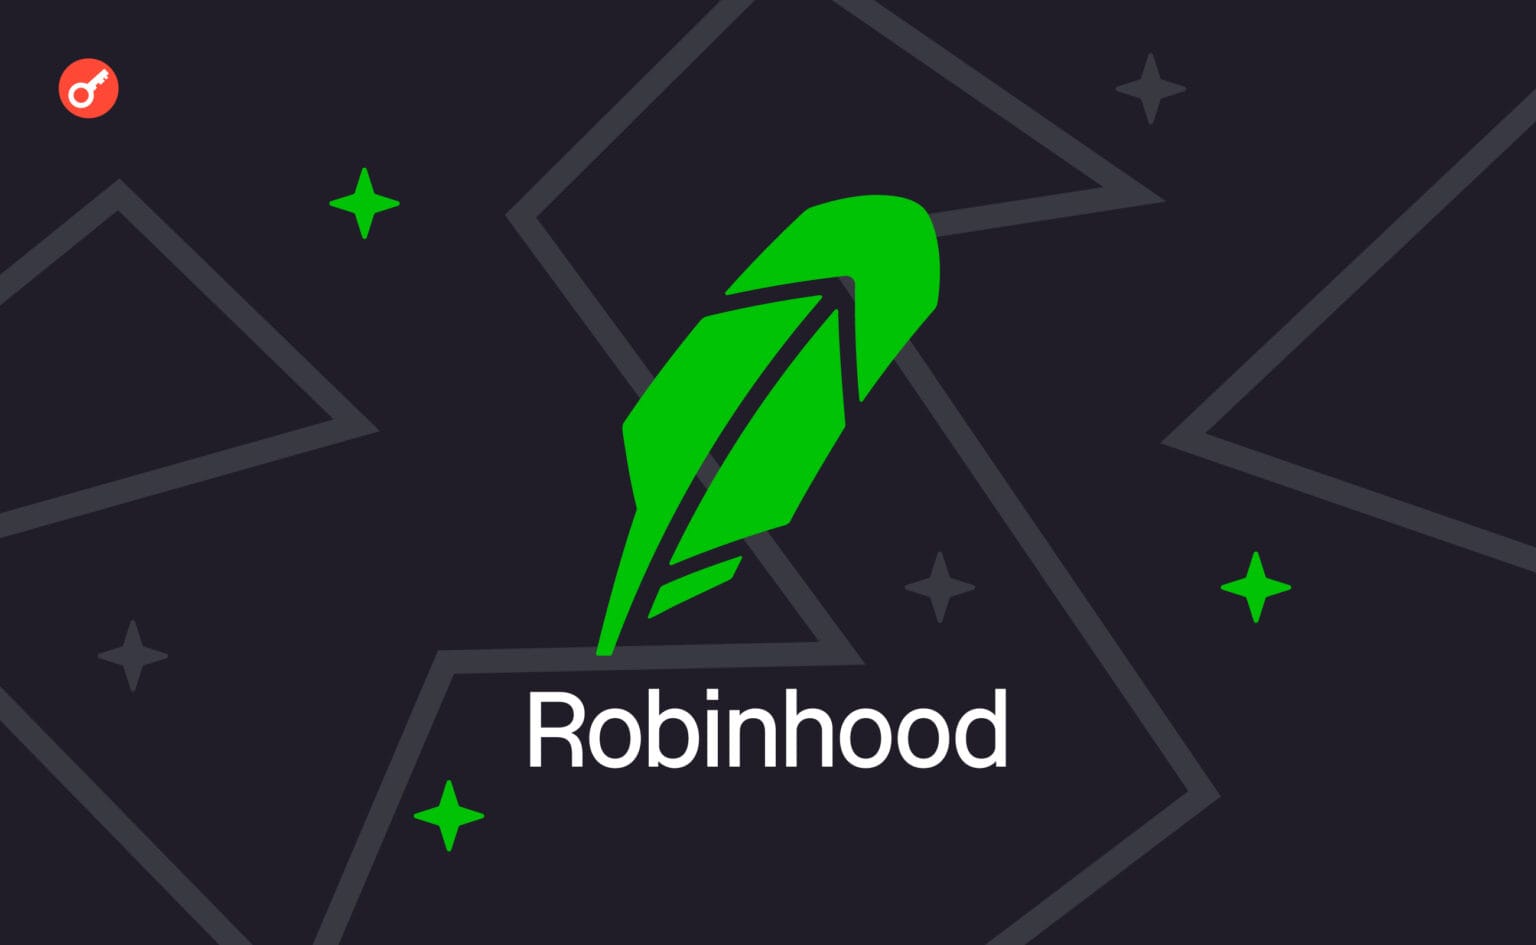 Robinhood has released a version of the crypto wallet for Android